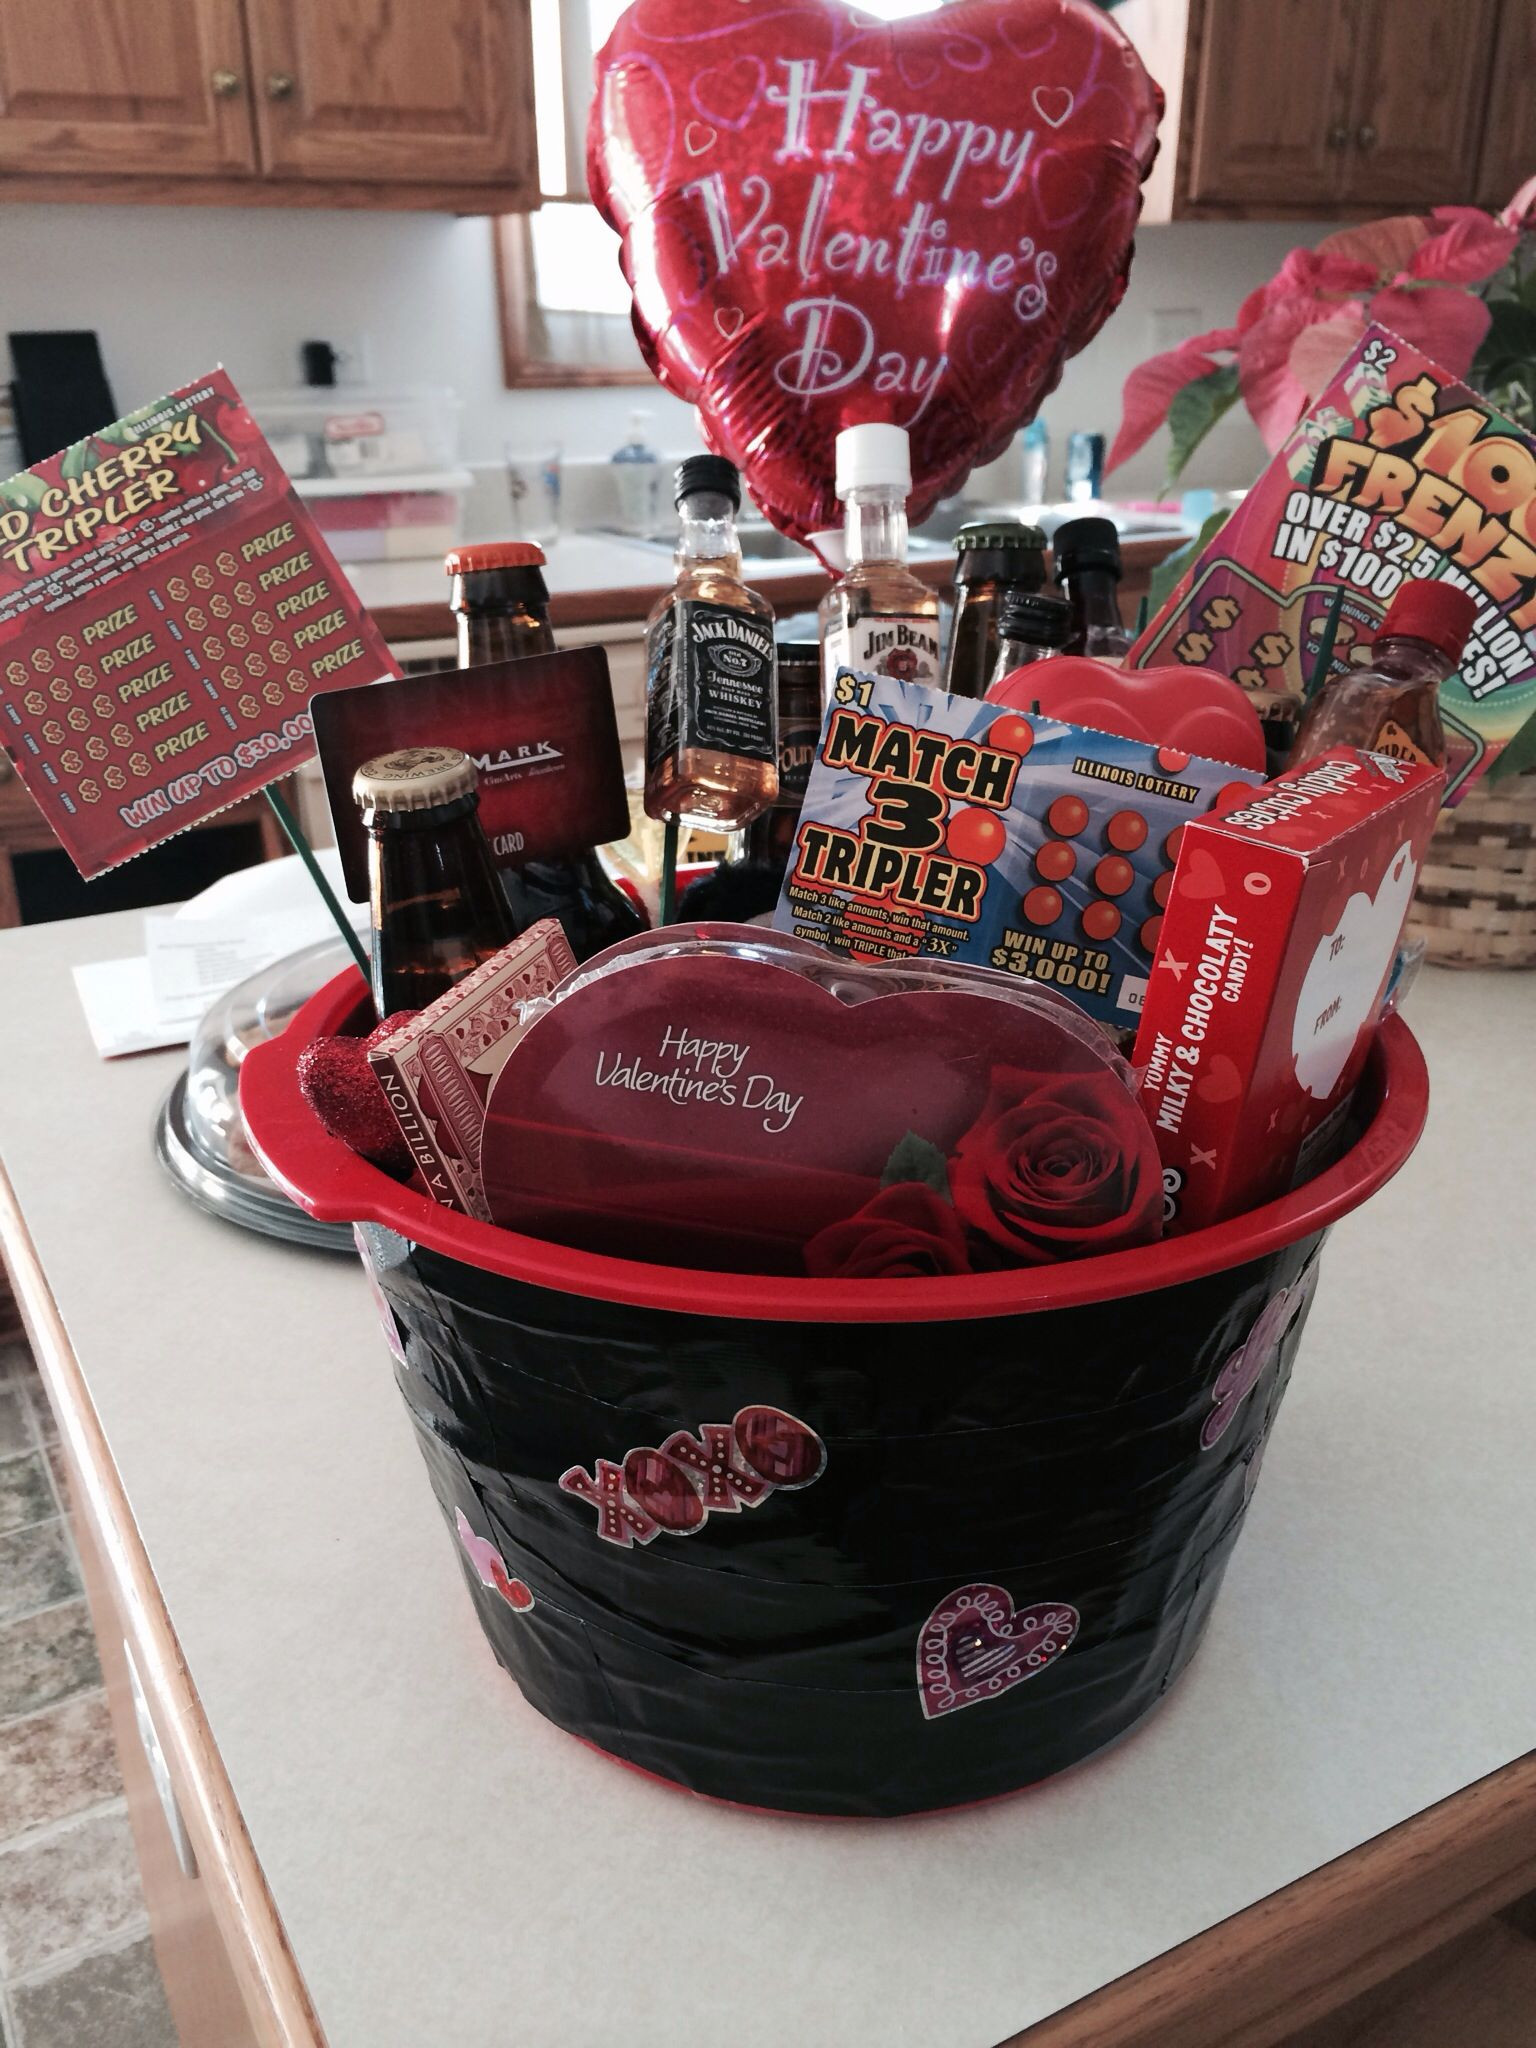 Valentines Gift Baskets For Him Ideas
 Valentines day basket for him I used 6 IPA beers